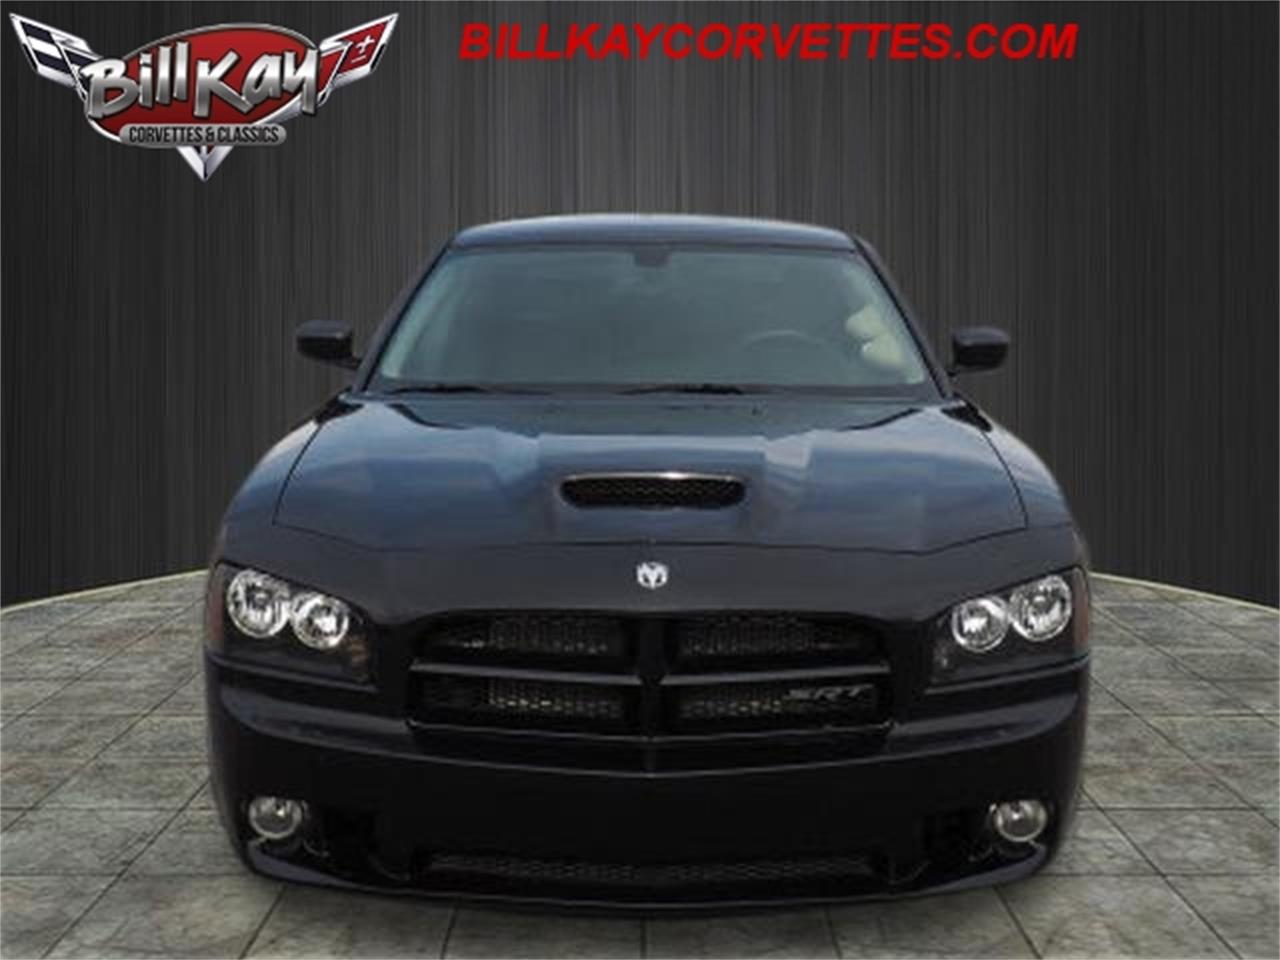 2006 Dodge Charger for sale in Downers Grove, IL